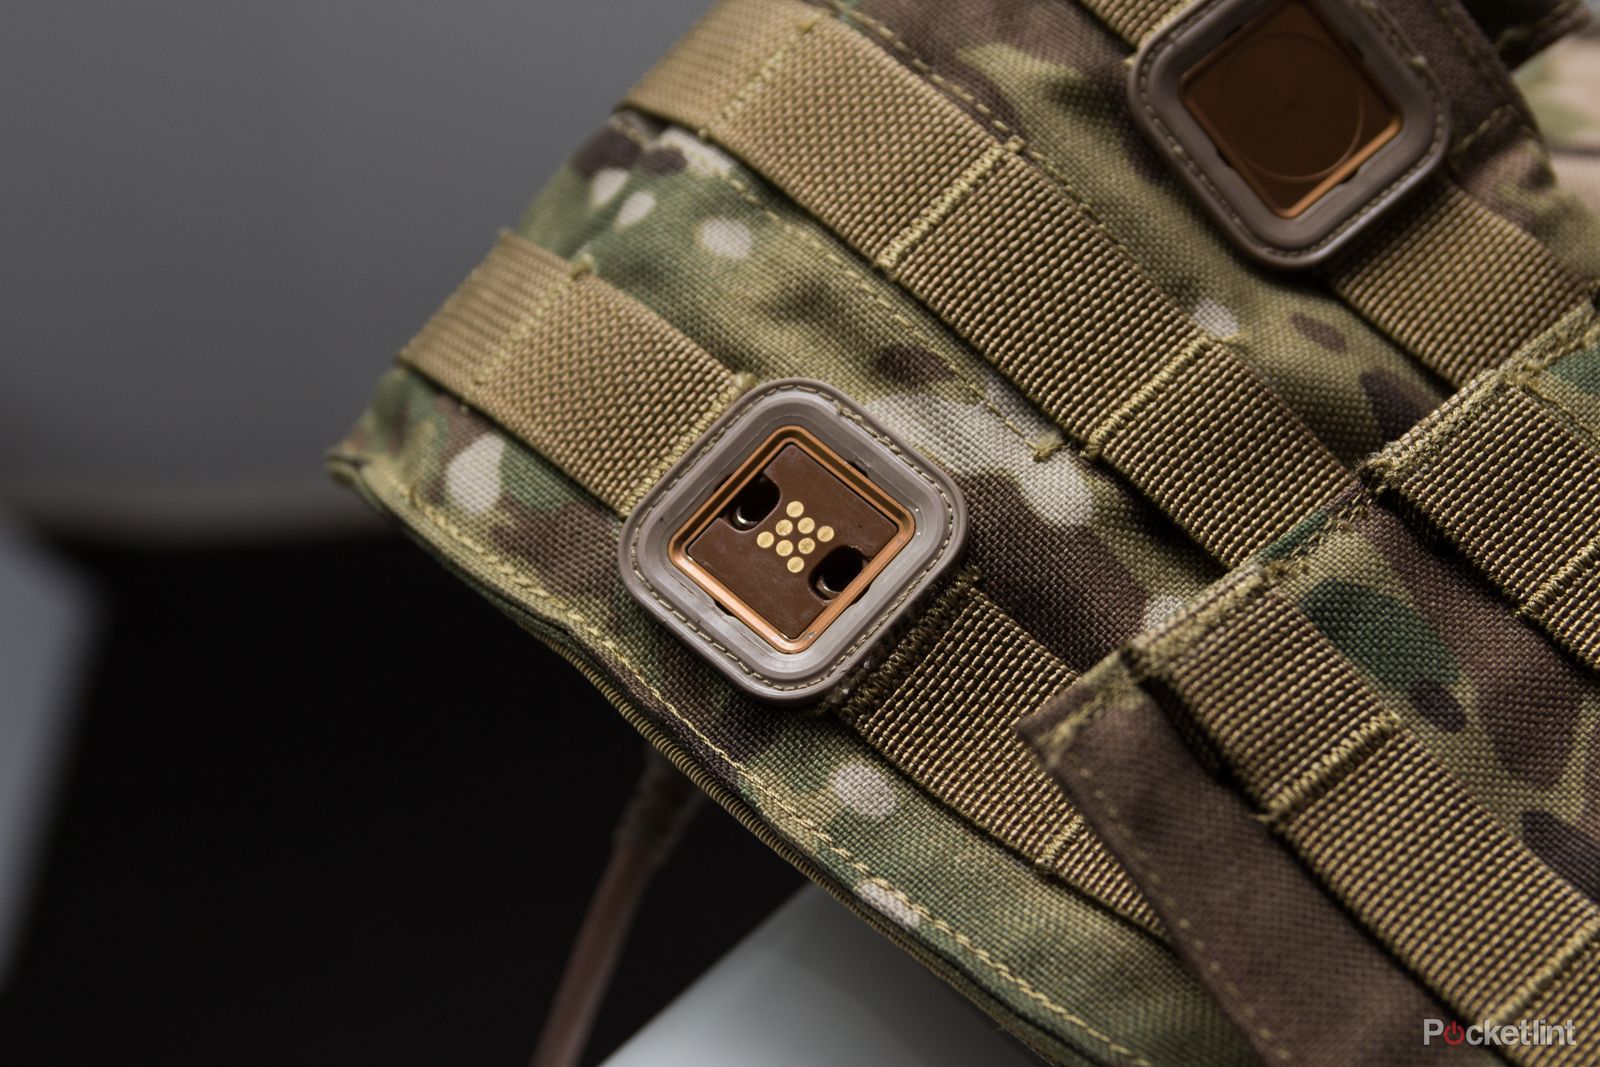 broadsword spine is the wearable tech to power future warfighters image 6